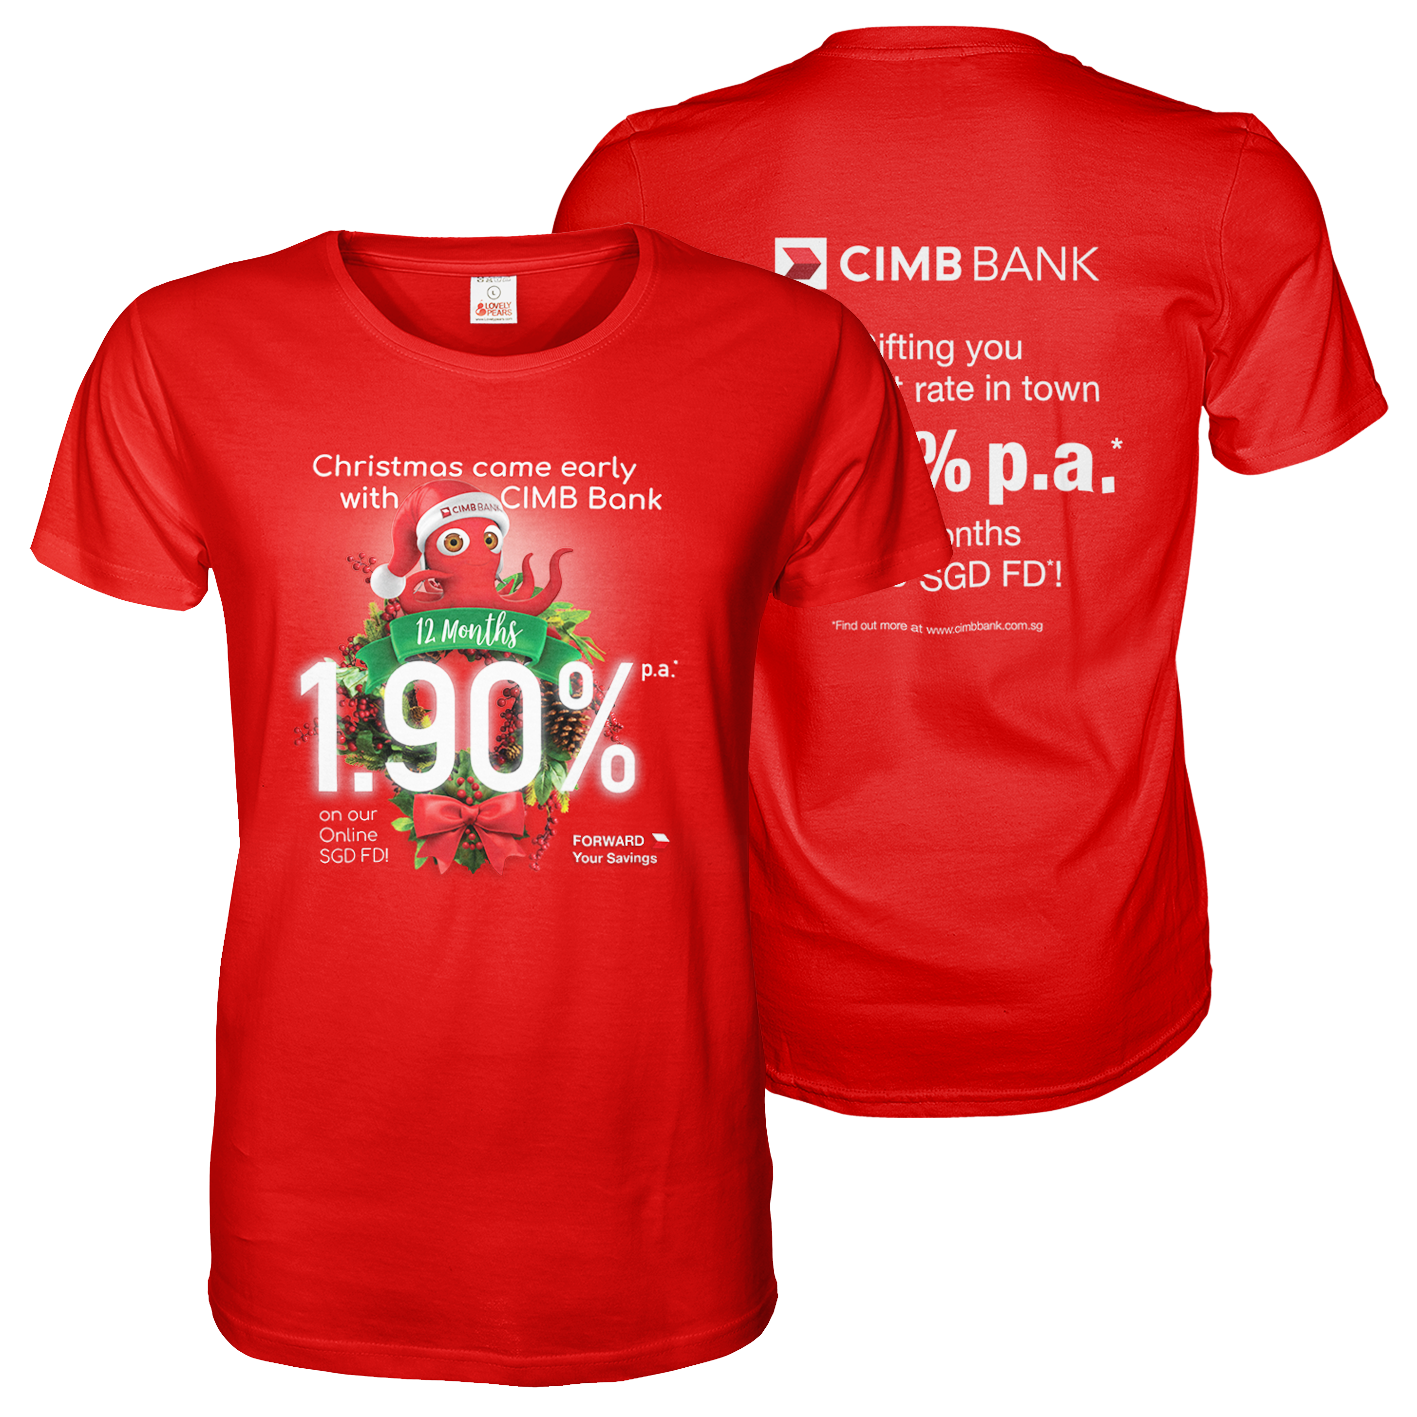 Red tee shirt with A3 CIMB bank front and back print